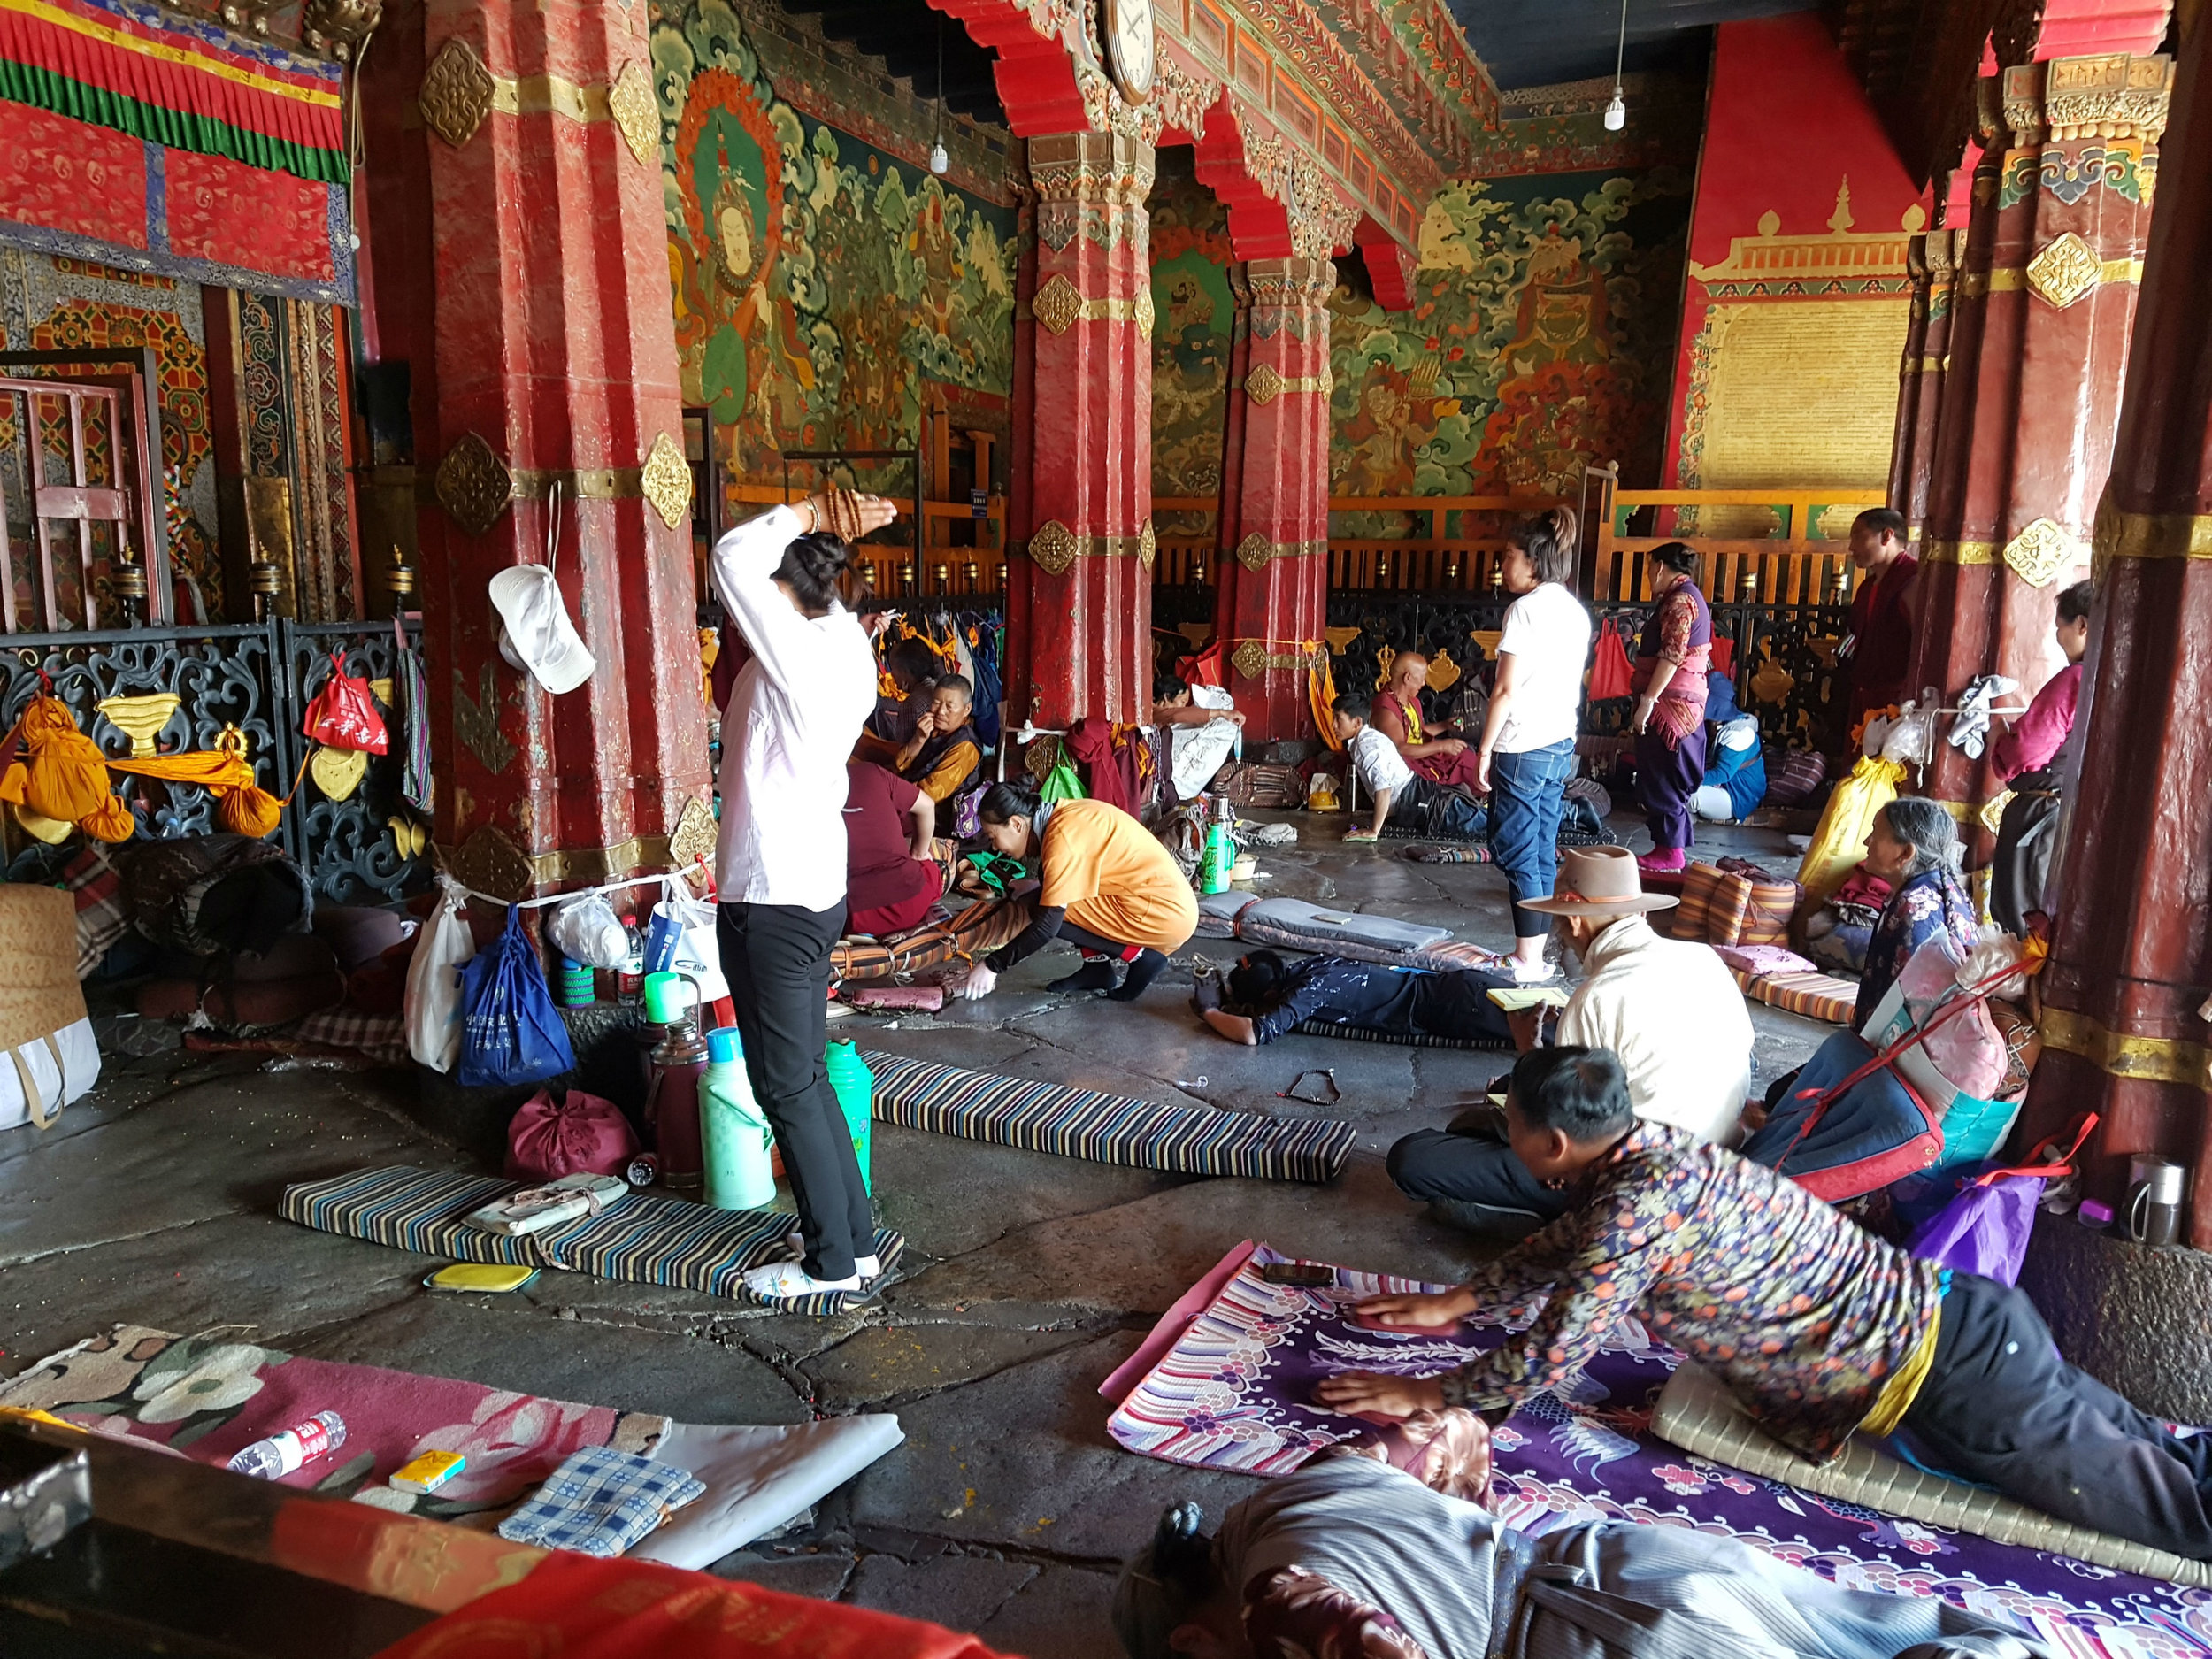 Devotees prostrating themselves in front of Jokhang Temple